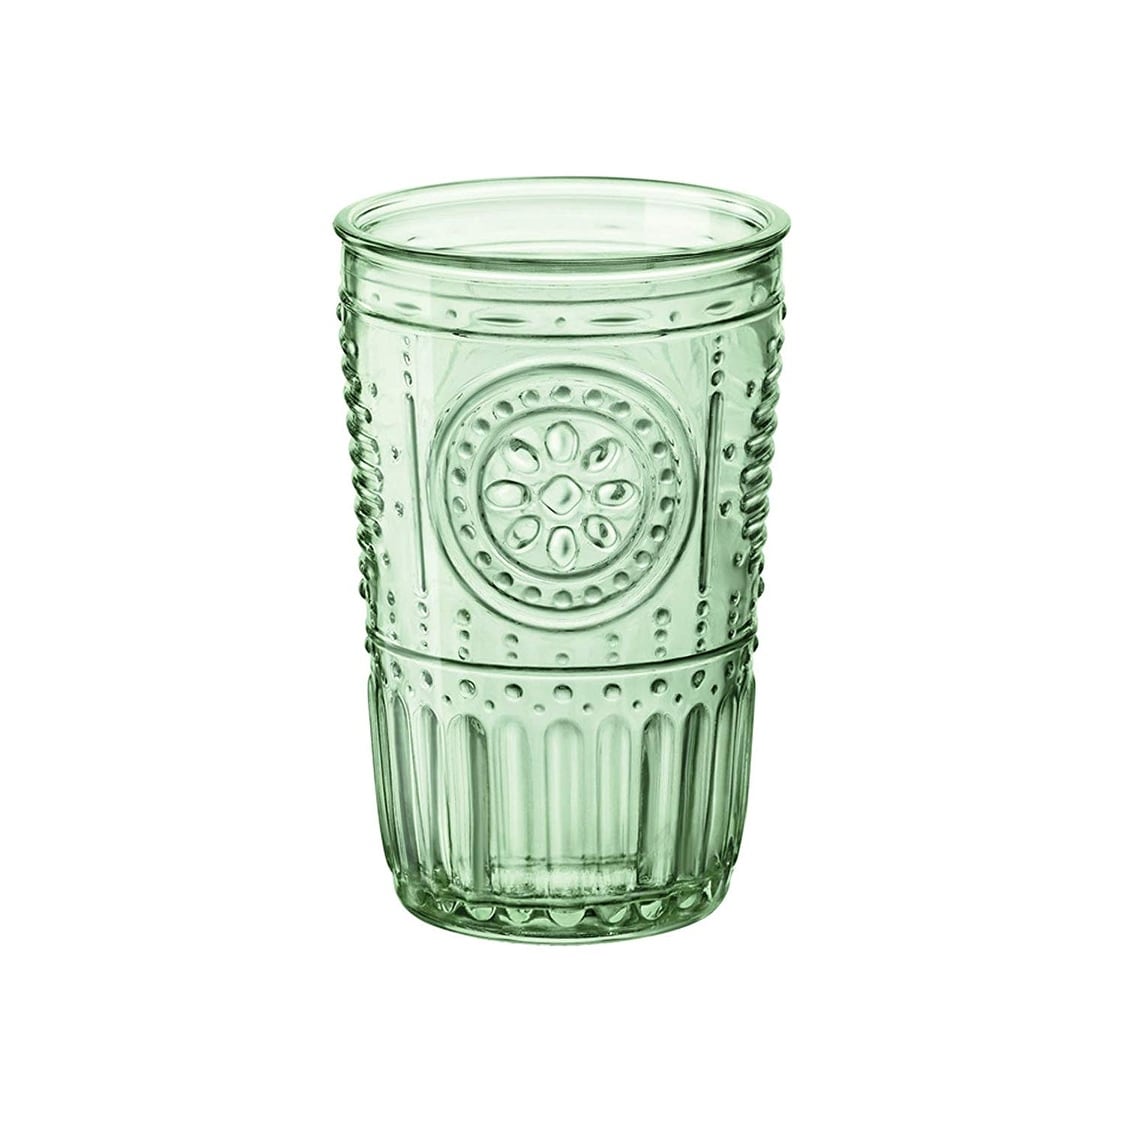 https://ak1.ostkcdn.com/images/products/is/images/direct/901dfc97bf5336cfc34b404e098ceb00b084fb2f/Bormioli-Rocco-Romantic-Glass-Drinking-Tumbler-Victorian-Inspired-Set-Of-4.jpg